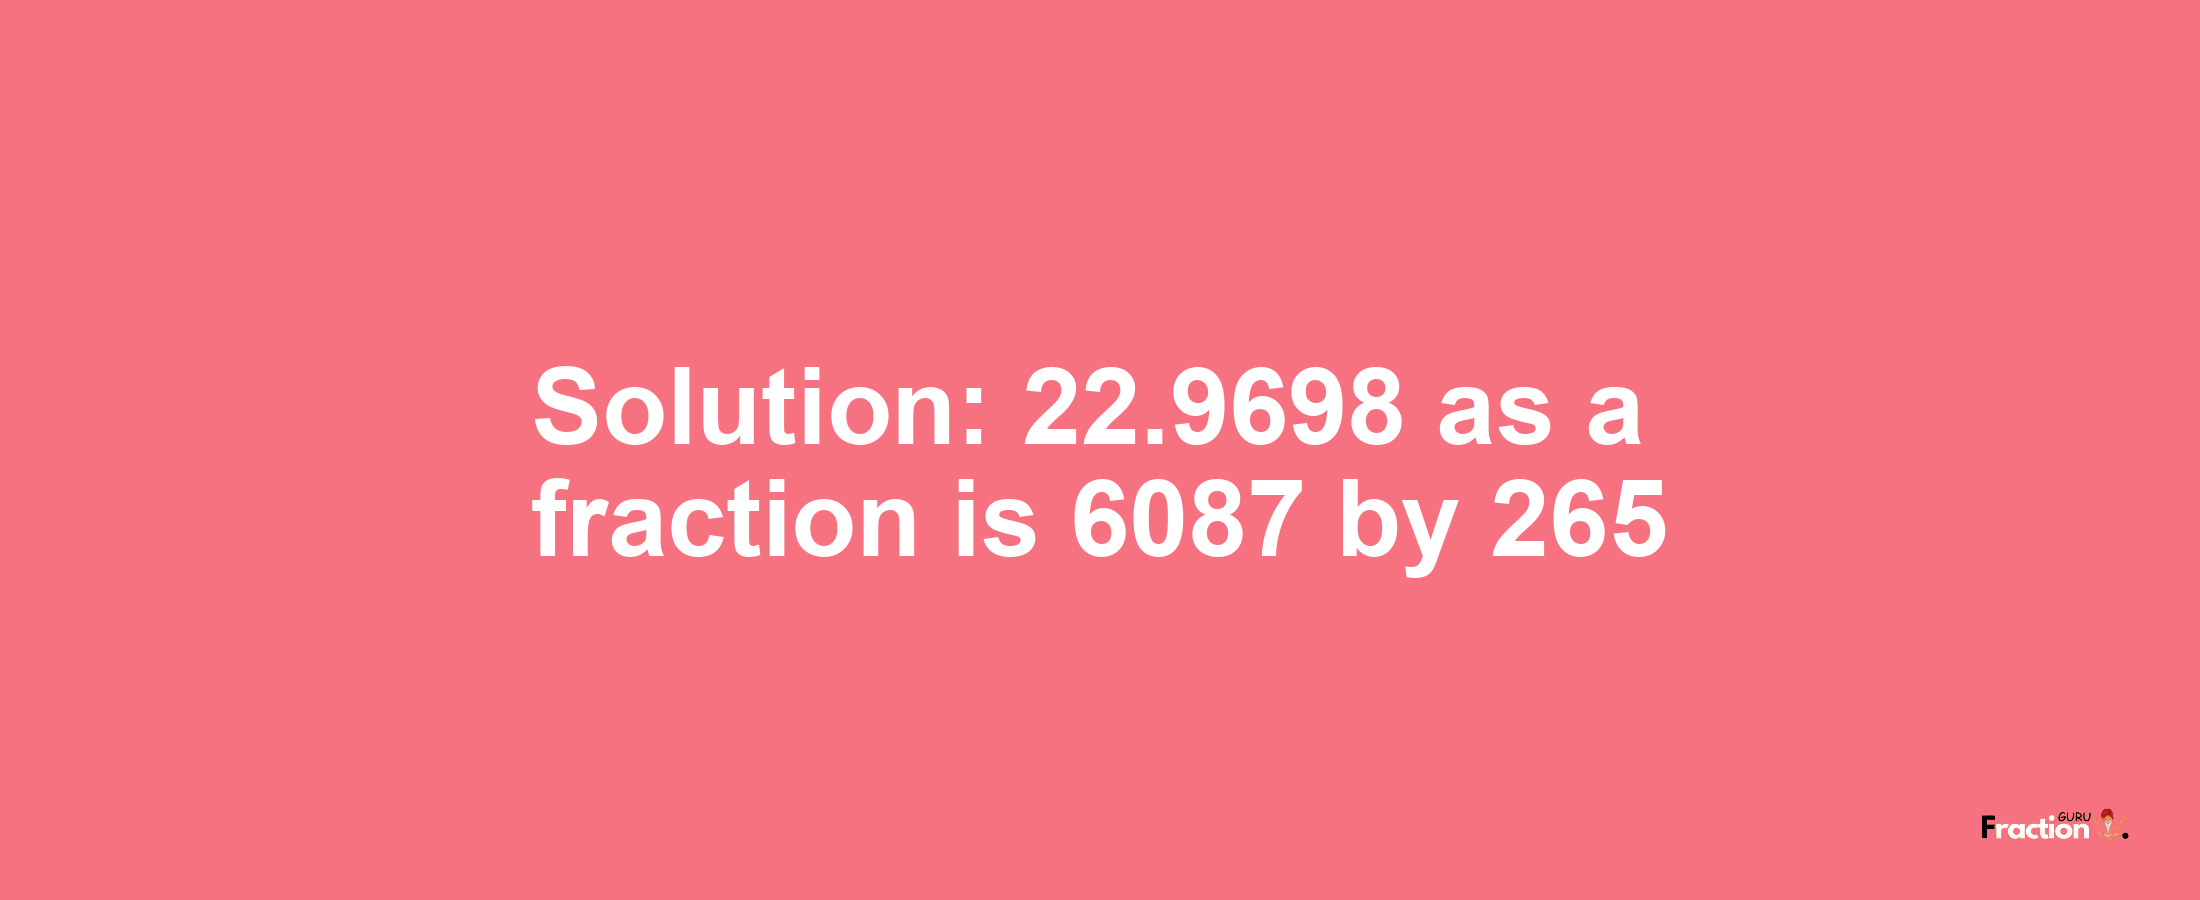 Solution:22.9698 as a fraction is 6087/265